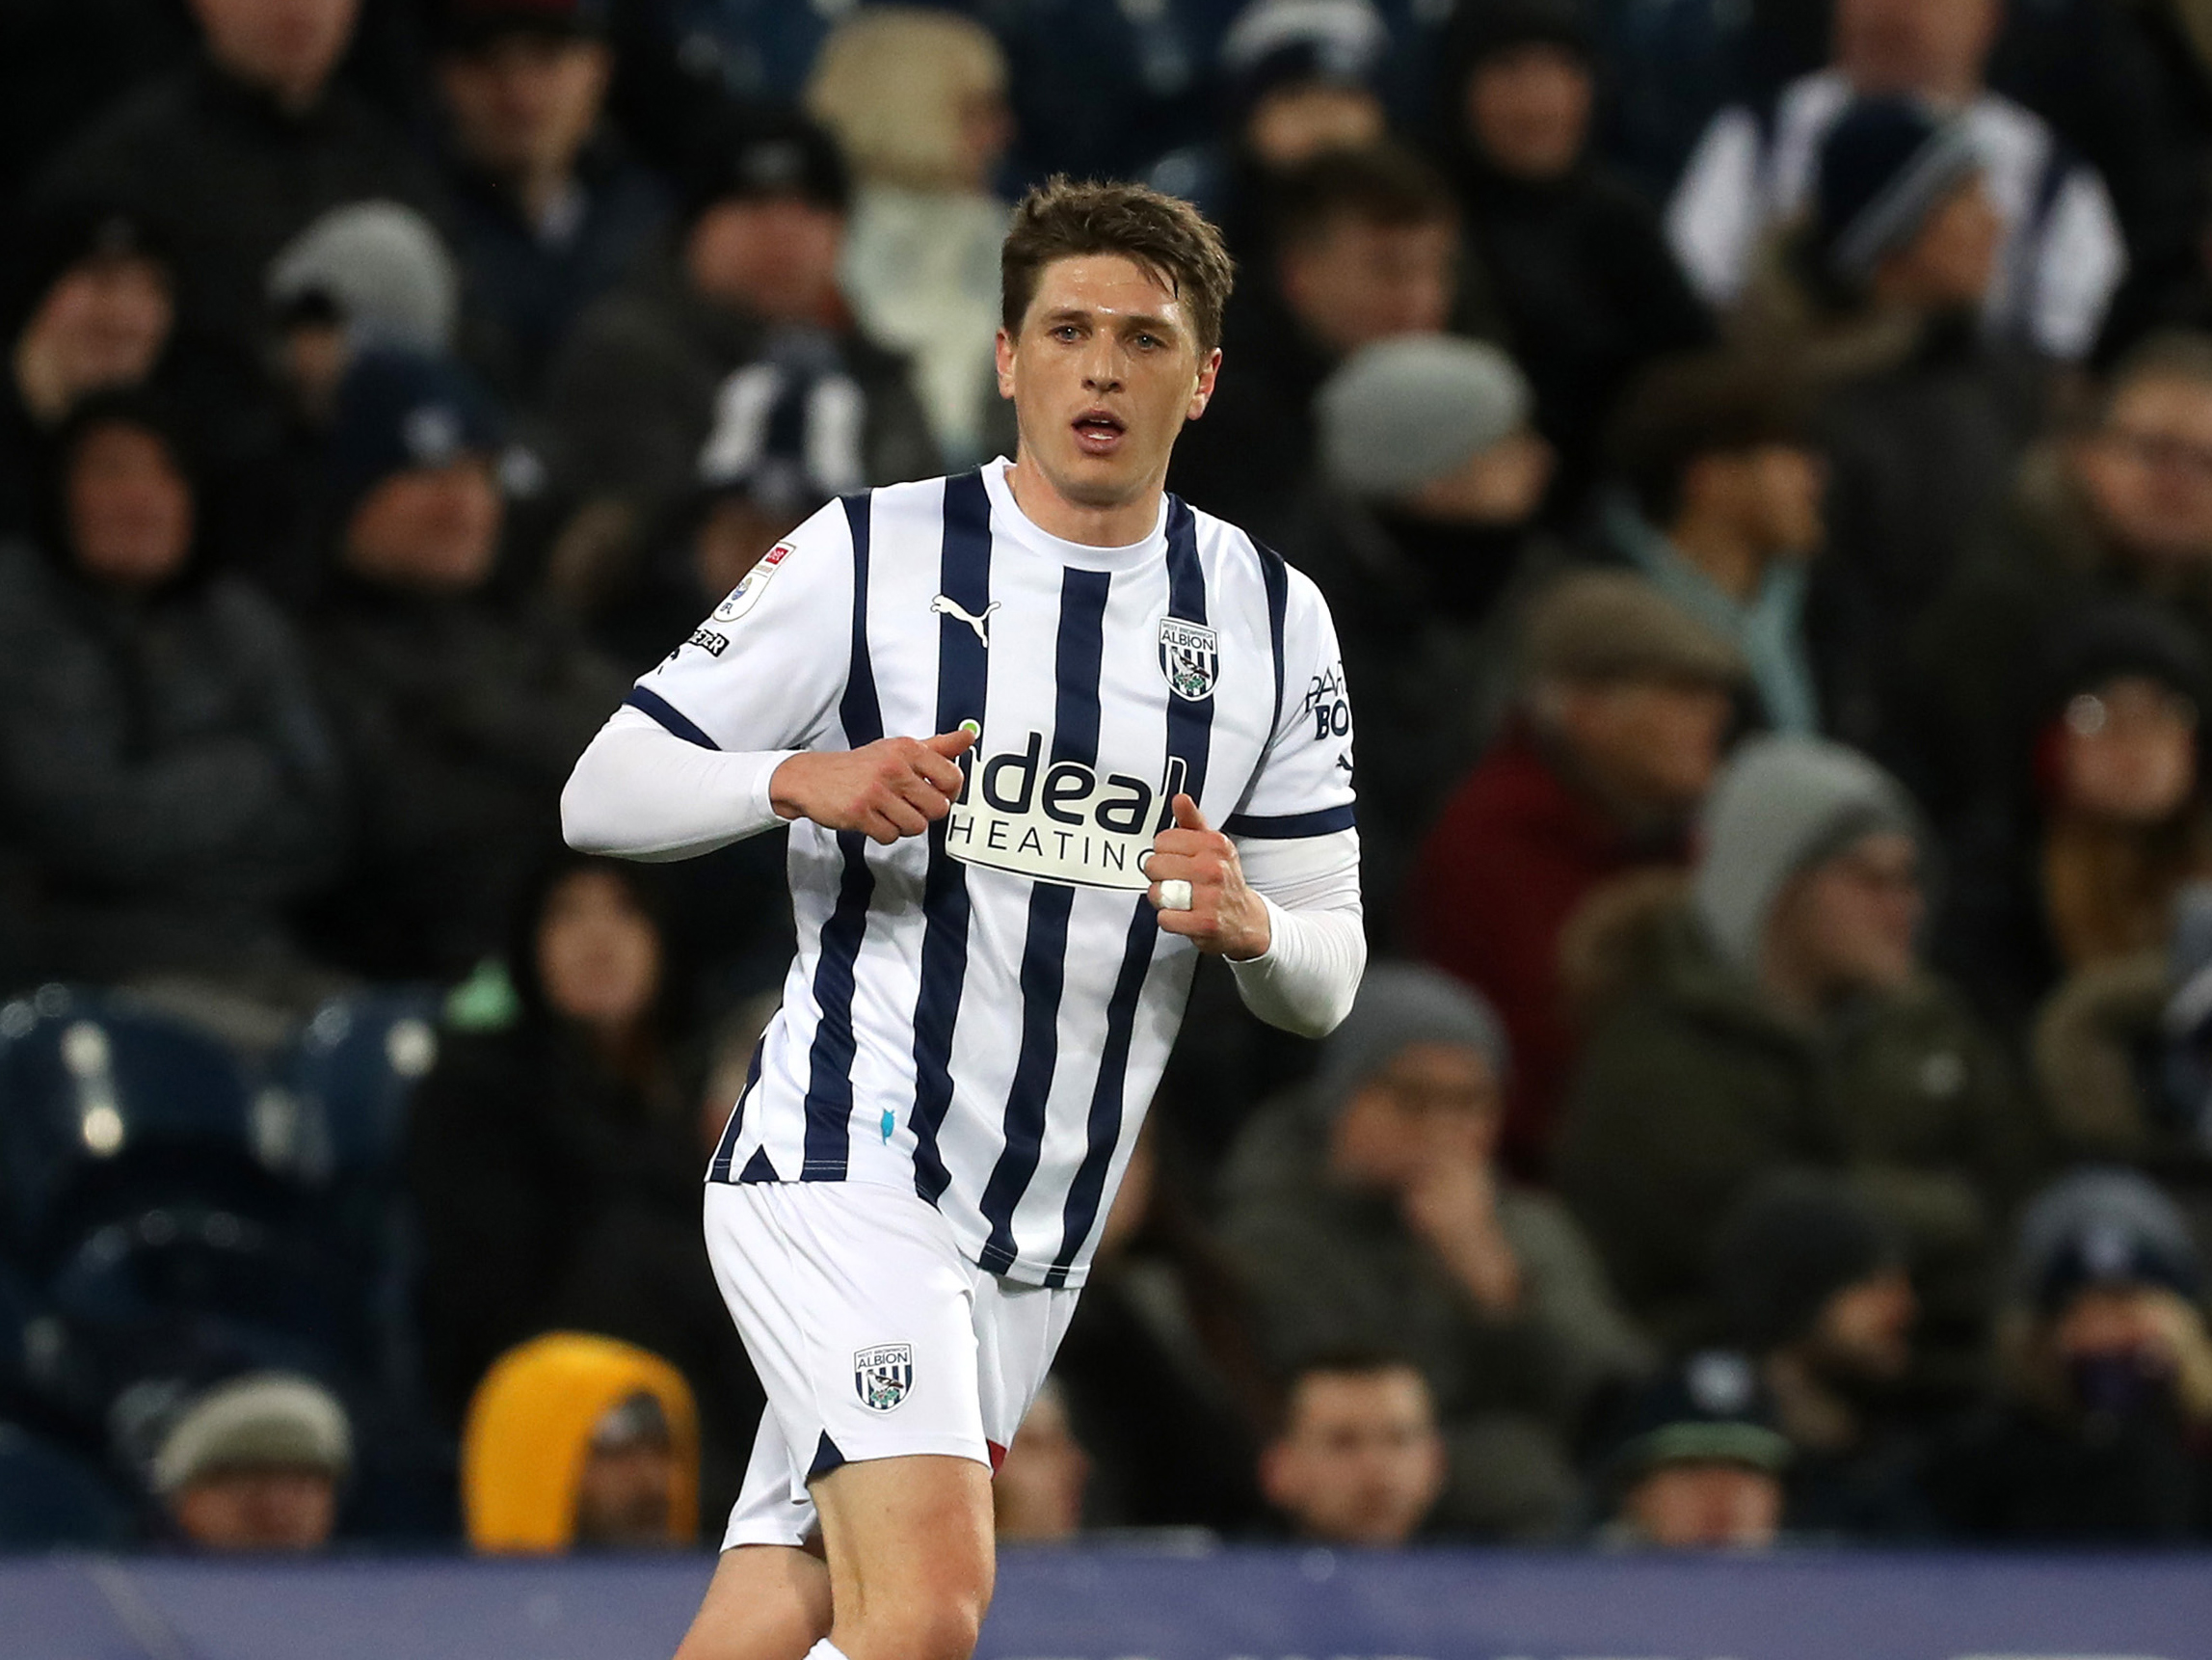 Adam Reach in action for Albion at The Hawthorns